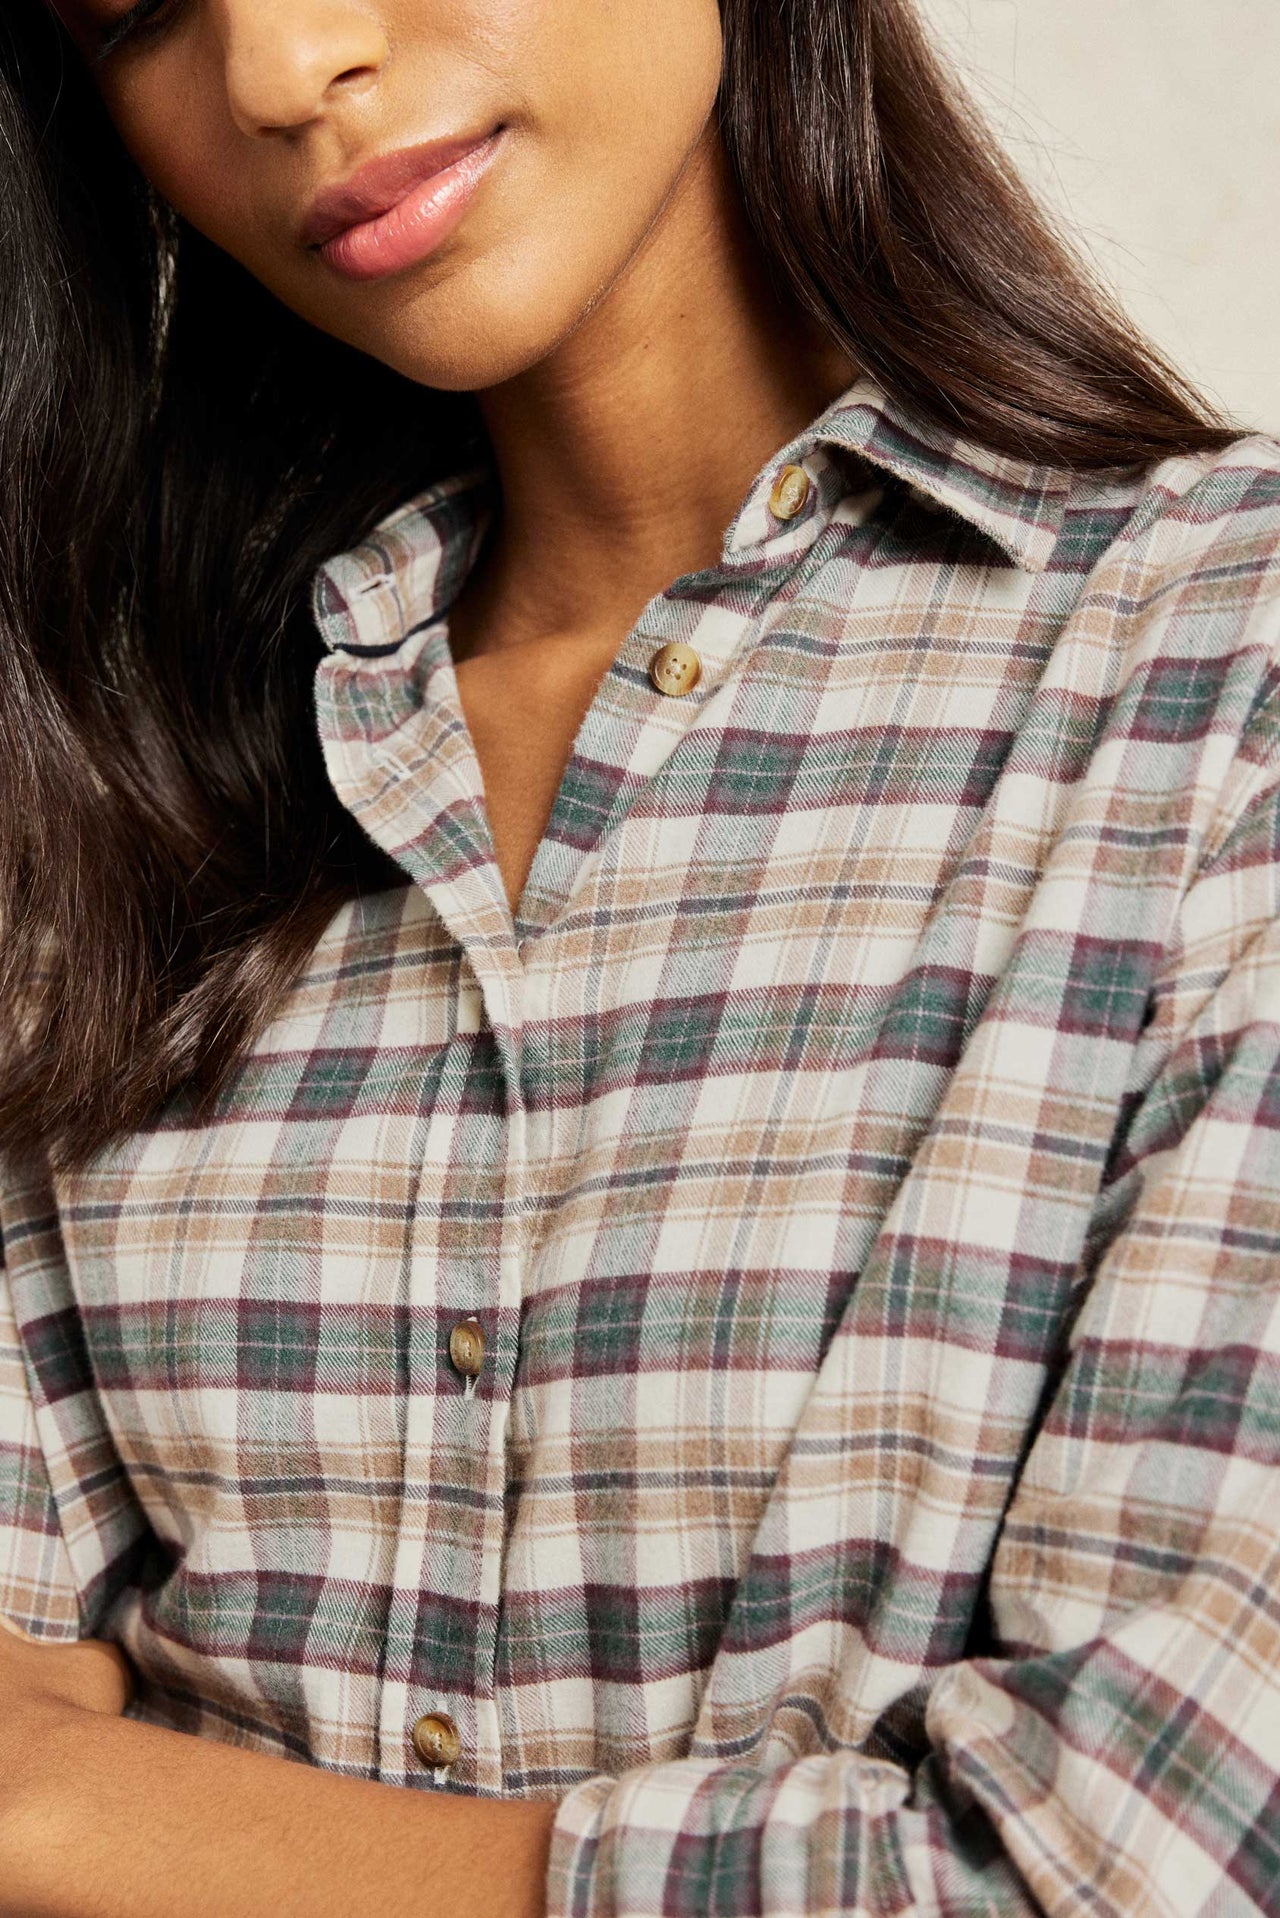 Soft brushed women’s cotton shirt with centre back box pleat and curved hem for extra ease. Timeless checks, and an effortless boyfriend fit. Casual wear. Size XS, S, M, L, XL. Made in Portugal. Boyfriend fit. Machine wash.